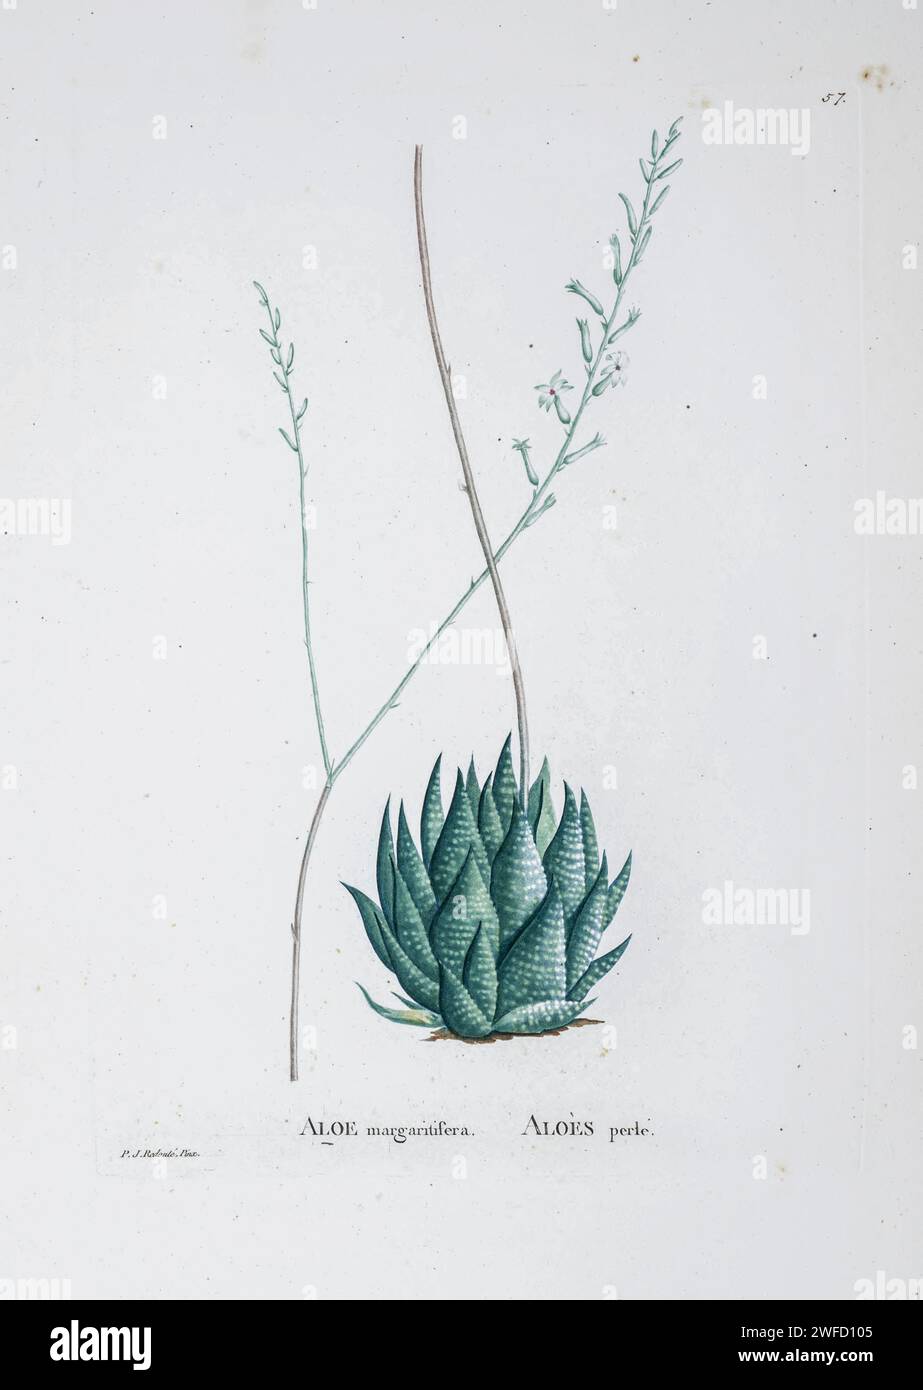 Haworthia margaritifera (L.)  Here As Aloe margaritifera from History of Succulent Plants [Plantarum historia succulentarum / Histoire des plantes grasses] painted by Pierre-Joseph Redouté and described by Augustin Pyramus de Candolle 1799 Haworthia is a large genus of small succulent plants endemic to Southern Africa. Like the aloes, they are members of the subfamily Asphodeloideae and they generally resemble miniature aloes, except in their flowers, which are distinctive in appearance. Stock Photo